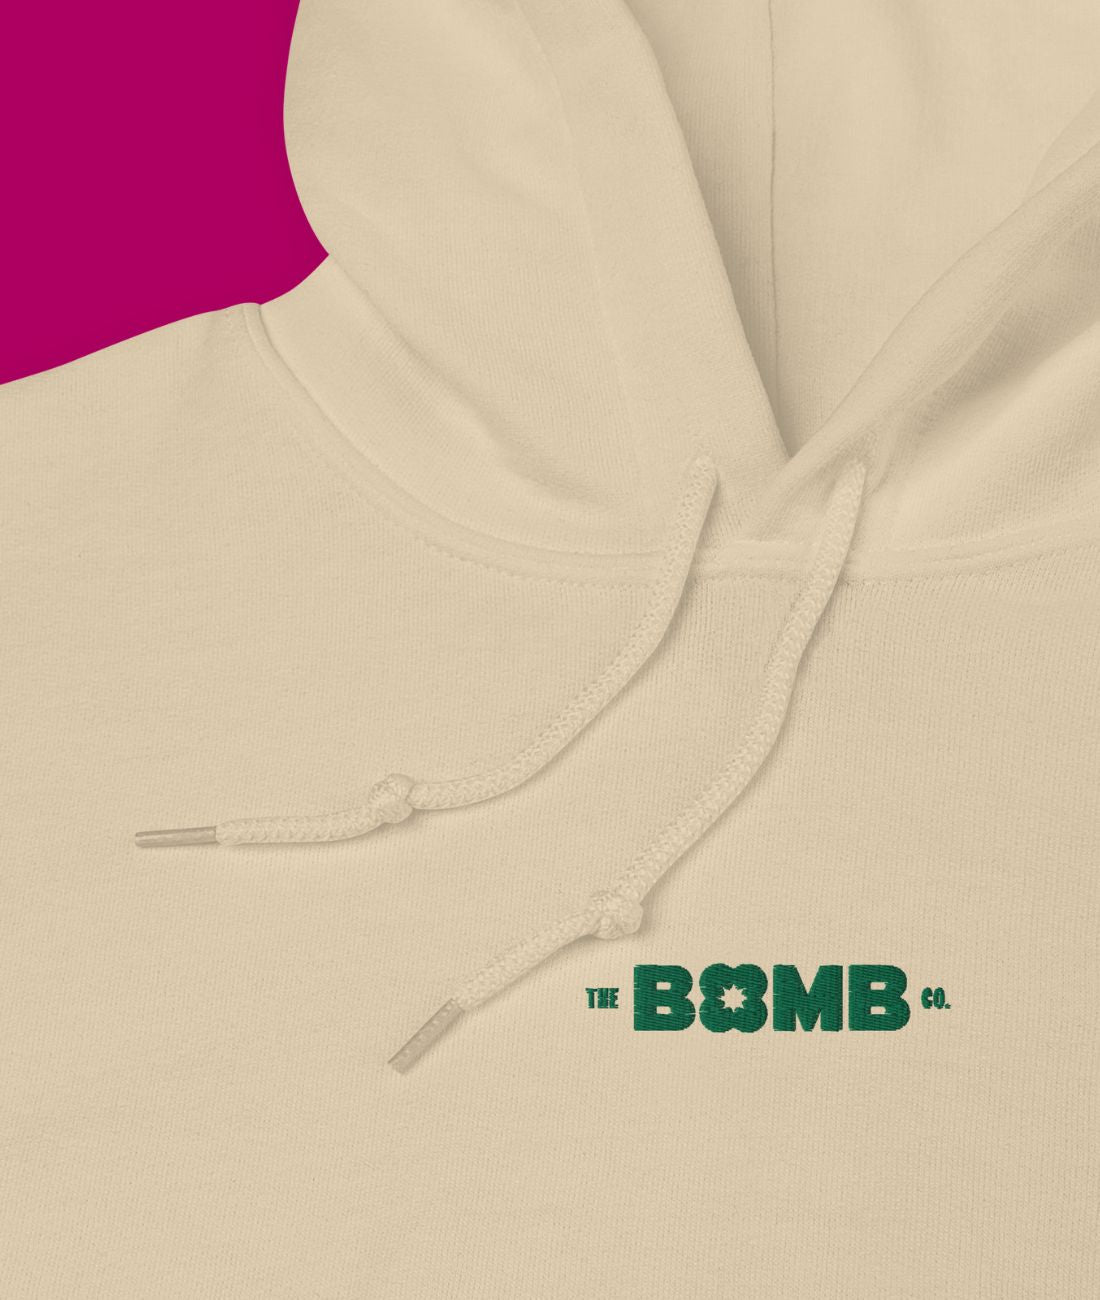 The Bomb Co. Embroidered Hoodie